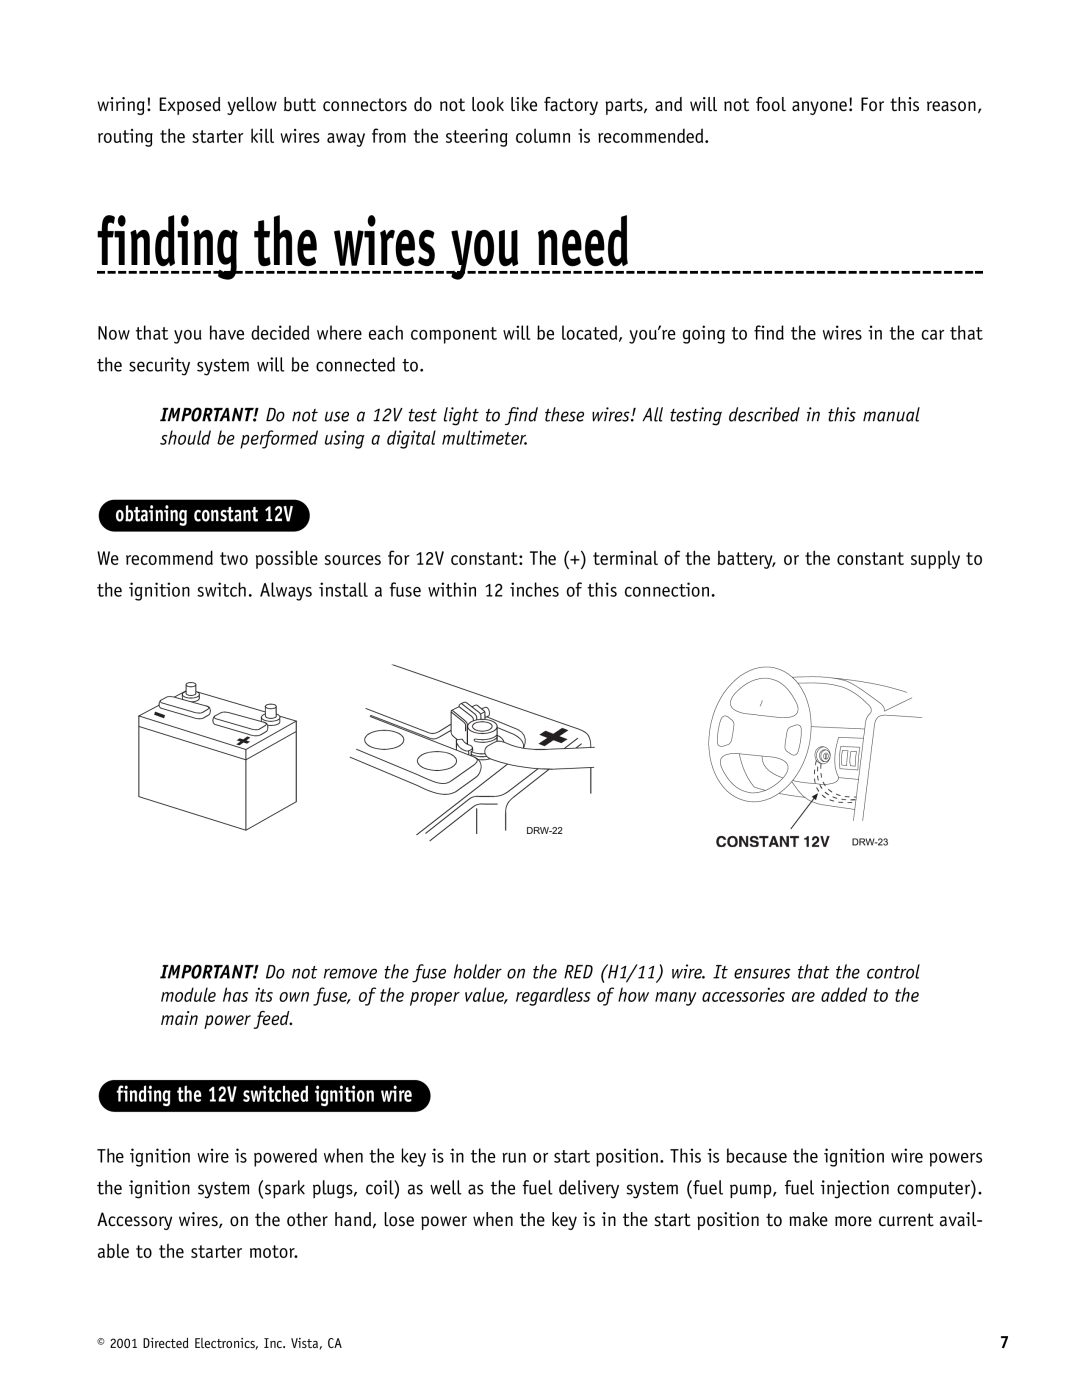 Hornet Car Security 700T manual finding the wires you need, obtaining constant, finding the 12V switched ignition wire 